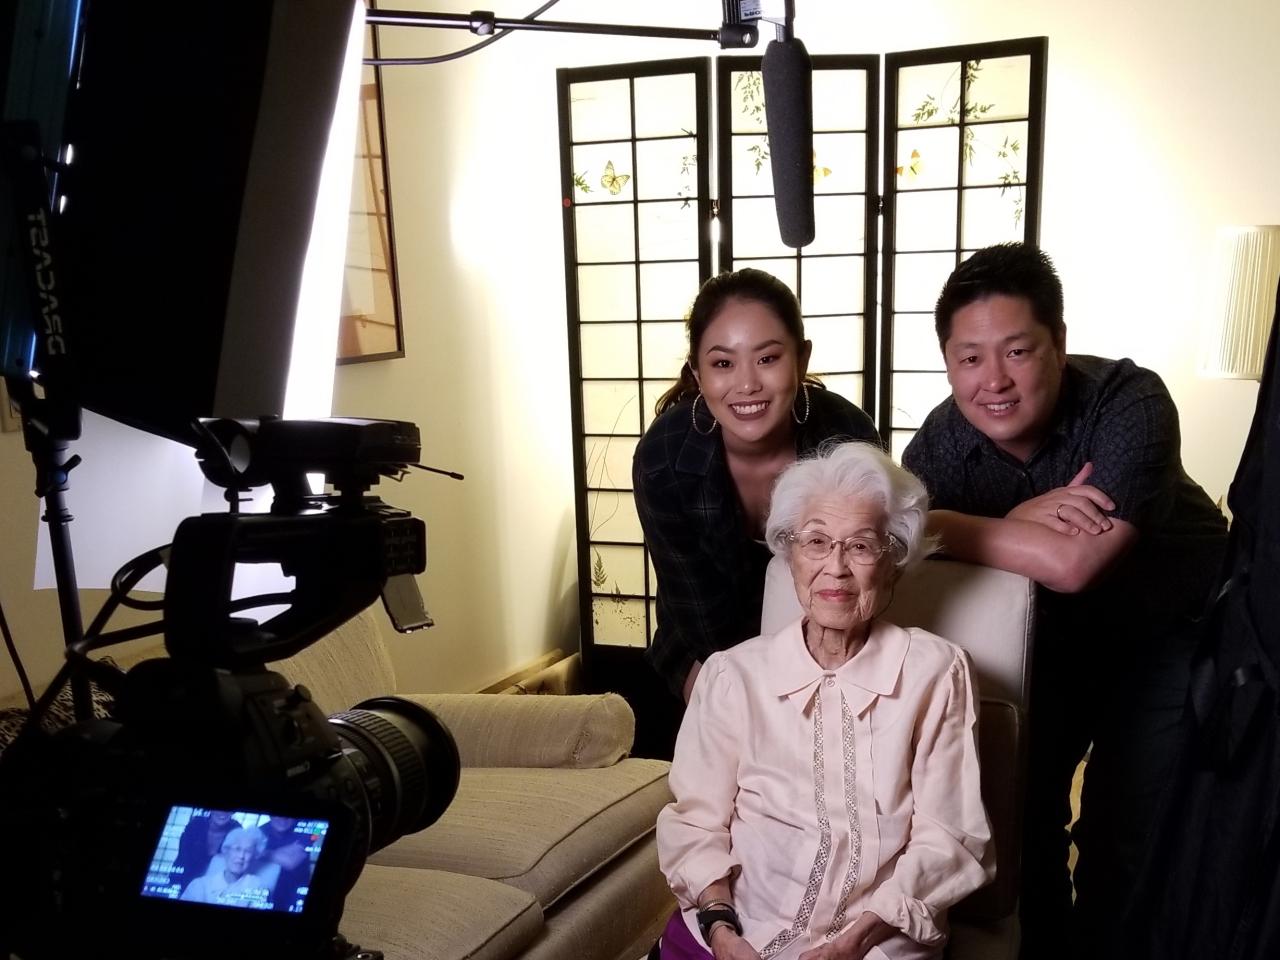 Filmmaker Jon Osaki with his daughter Mike and Aiko Herzig Yoshinaga pose together for a photo while filming Aiko's interview.